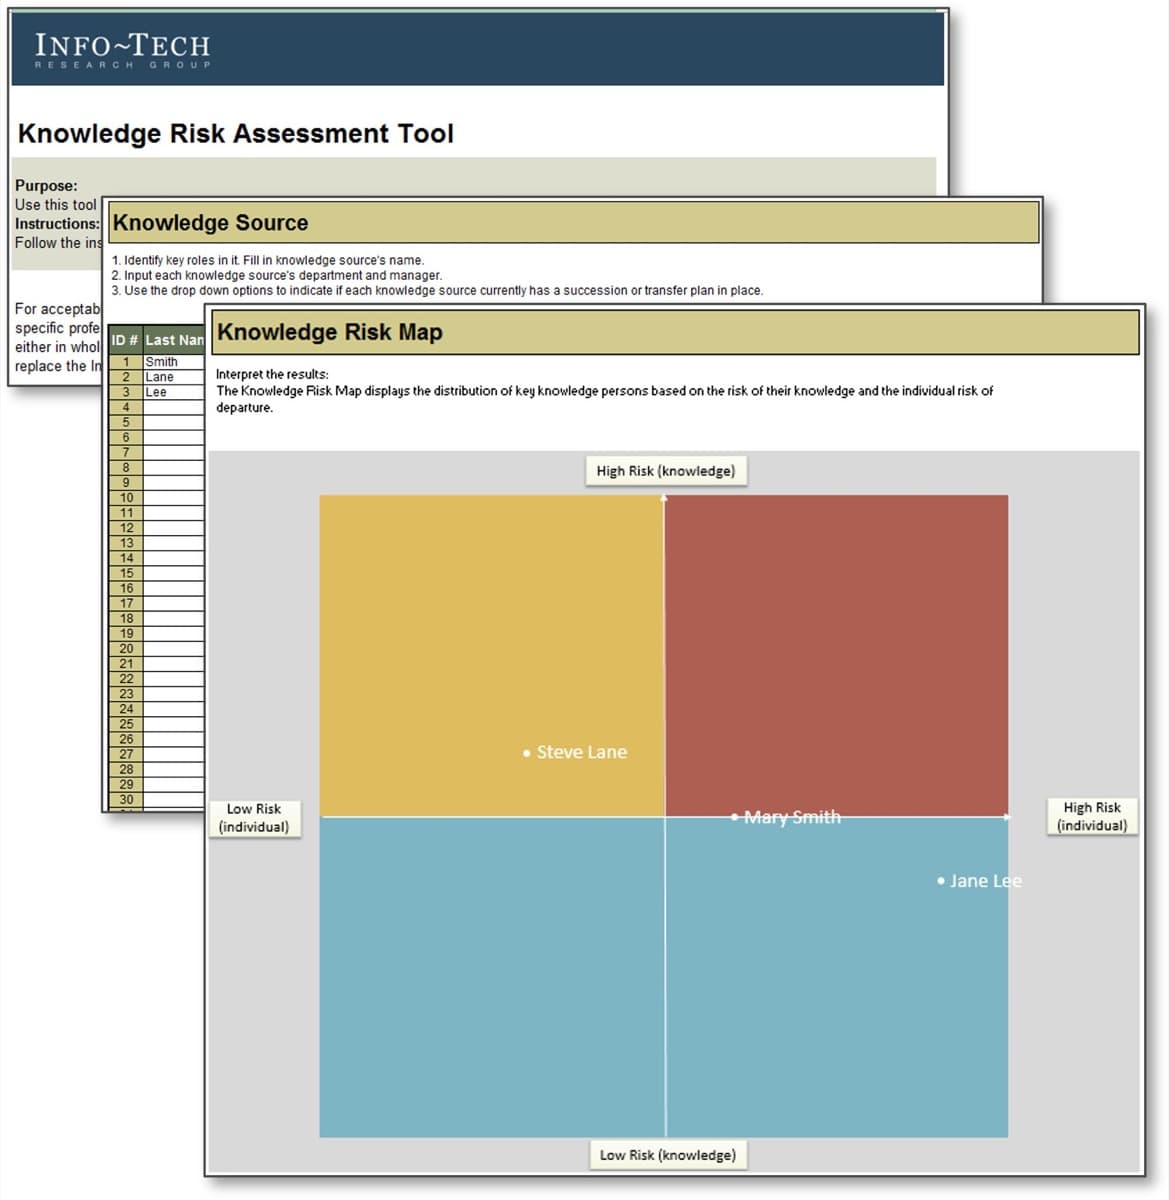 The image contains screenshots from the Knowledge Risk Assessment Tool.